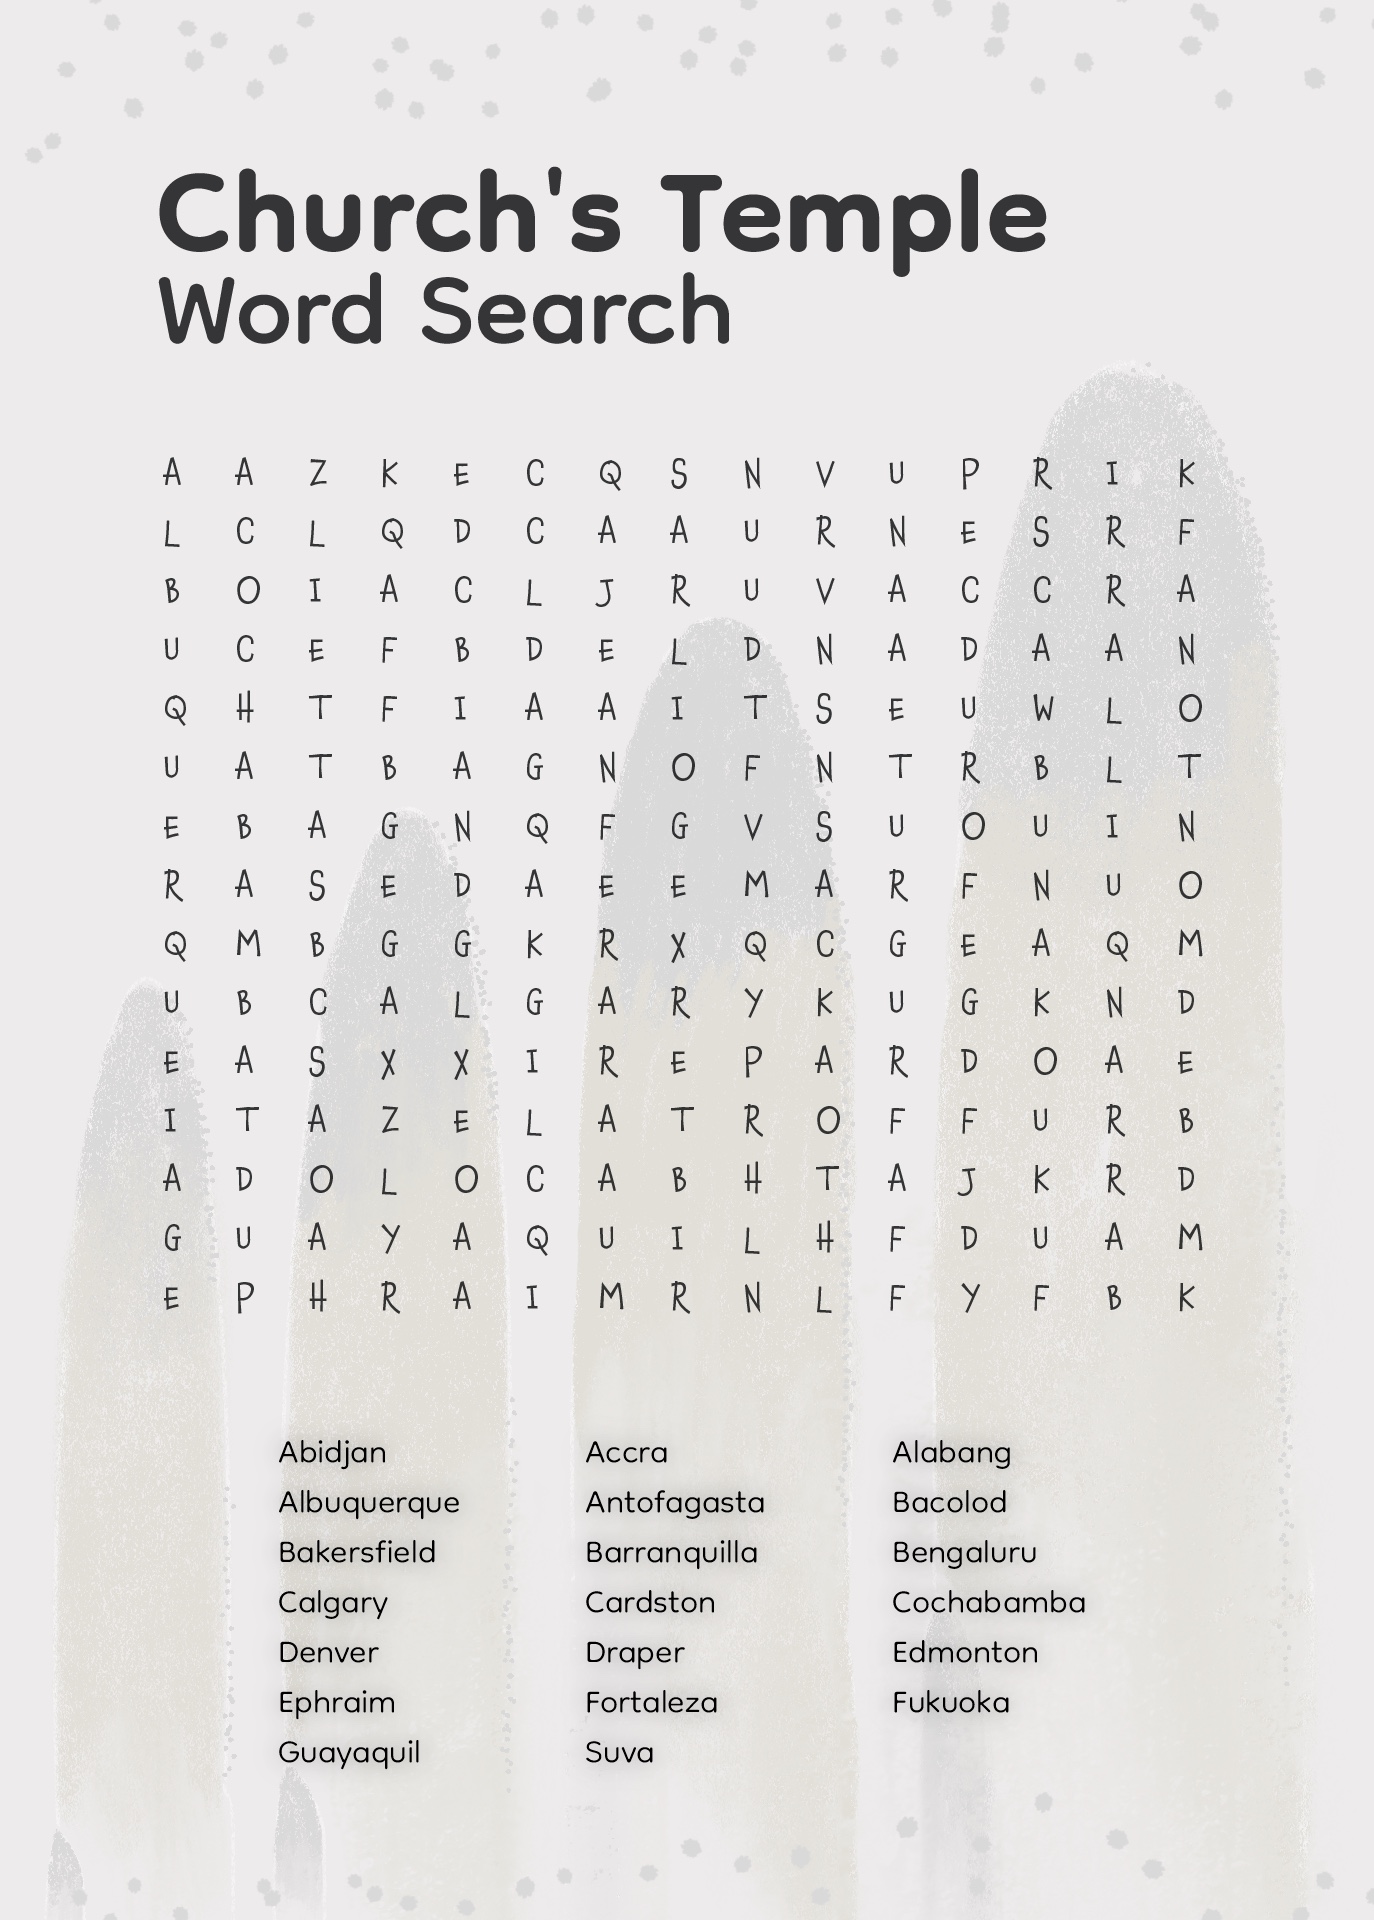 LDS Temple Word Search Puzzle